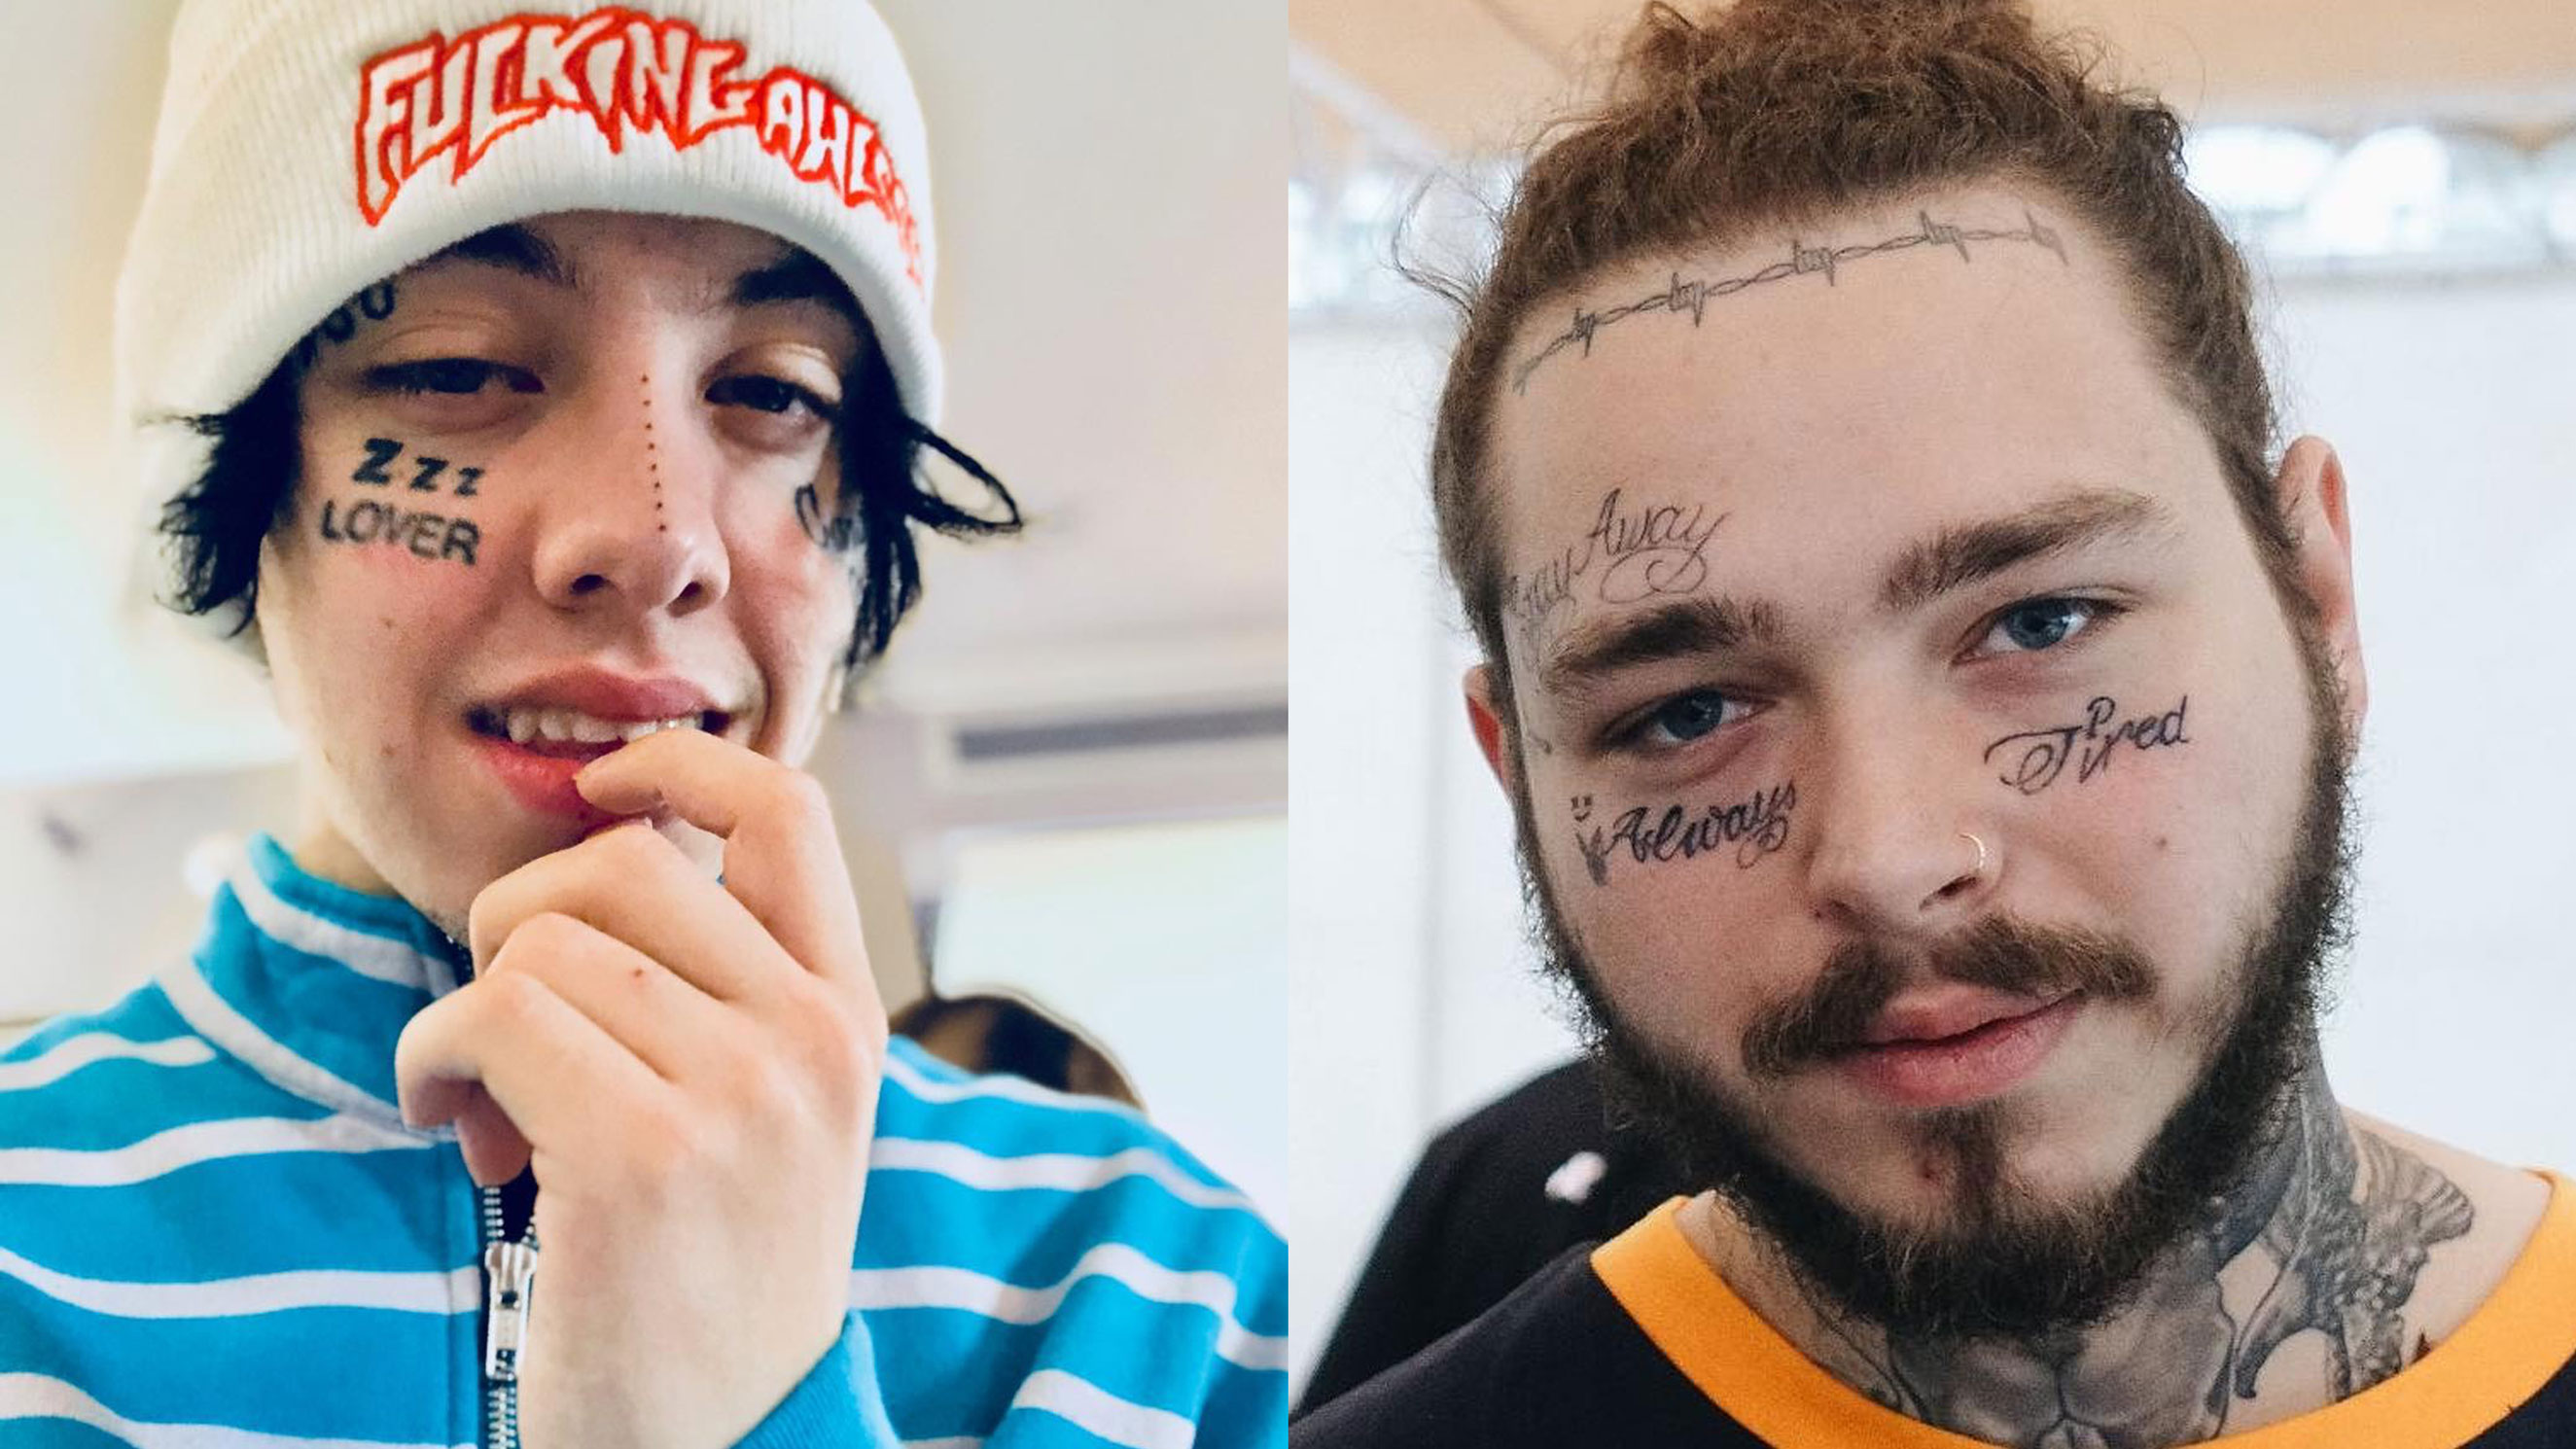 Why face tattoos are the new normal